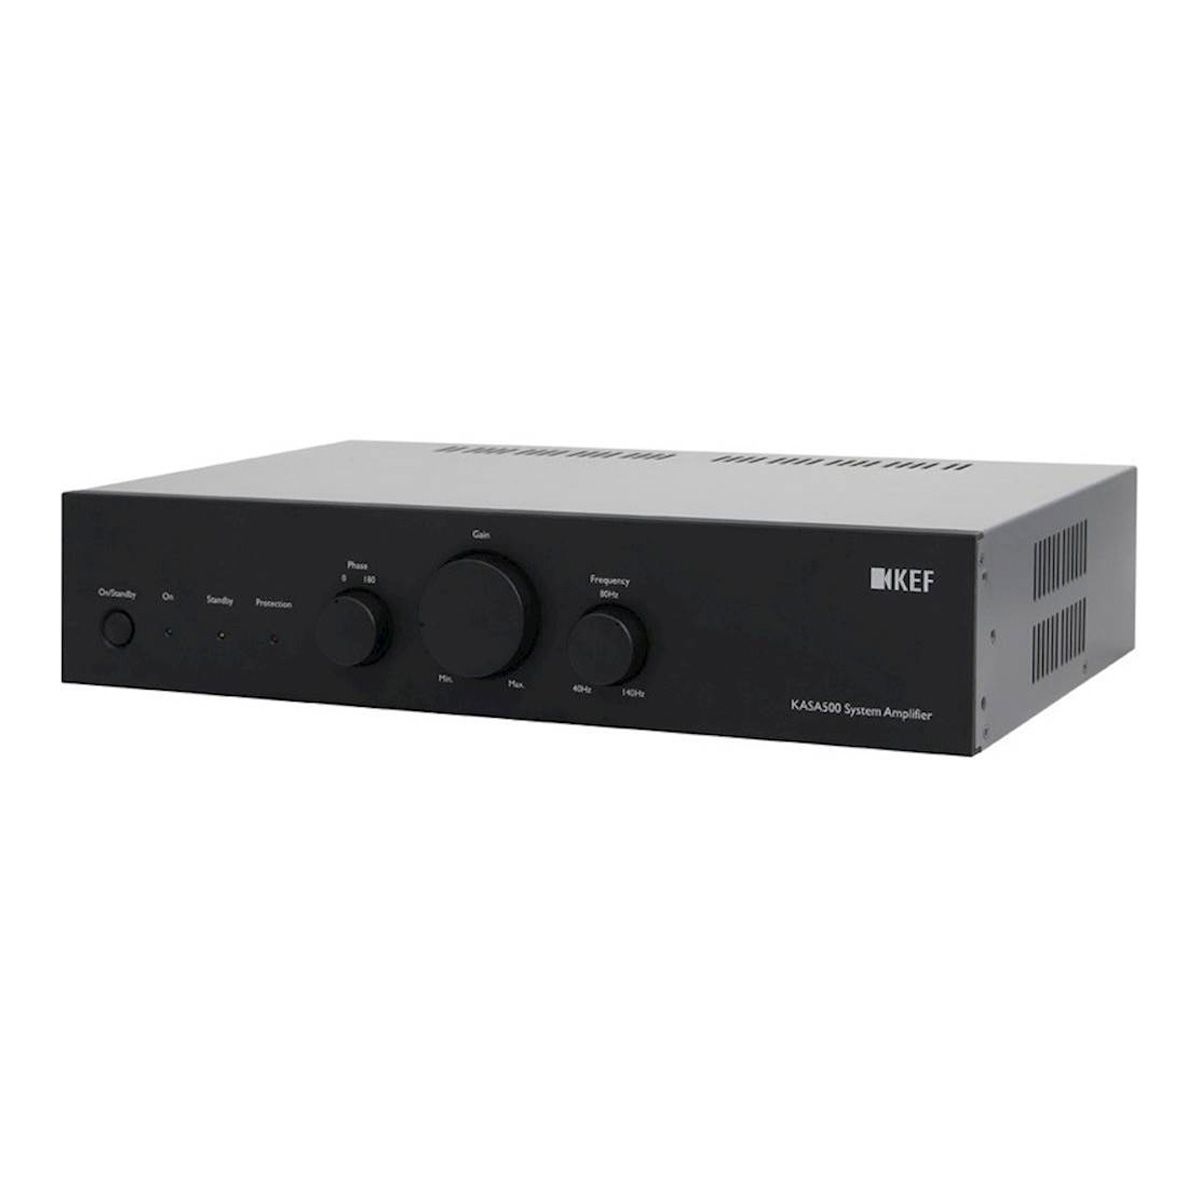 KEF KASA500 DSP Controlled 250W x 2 Systems Amp - Gray 2U Rack Ears Included - Each - angled front view